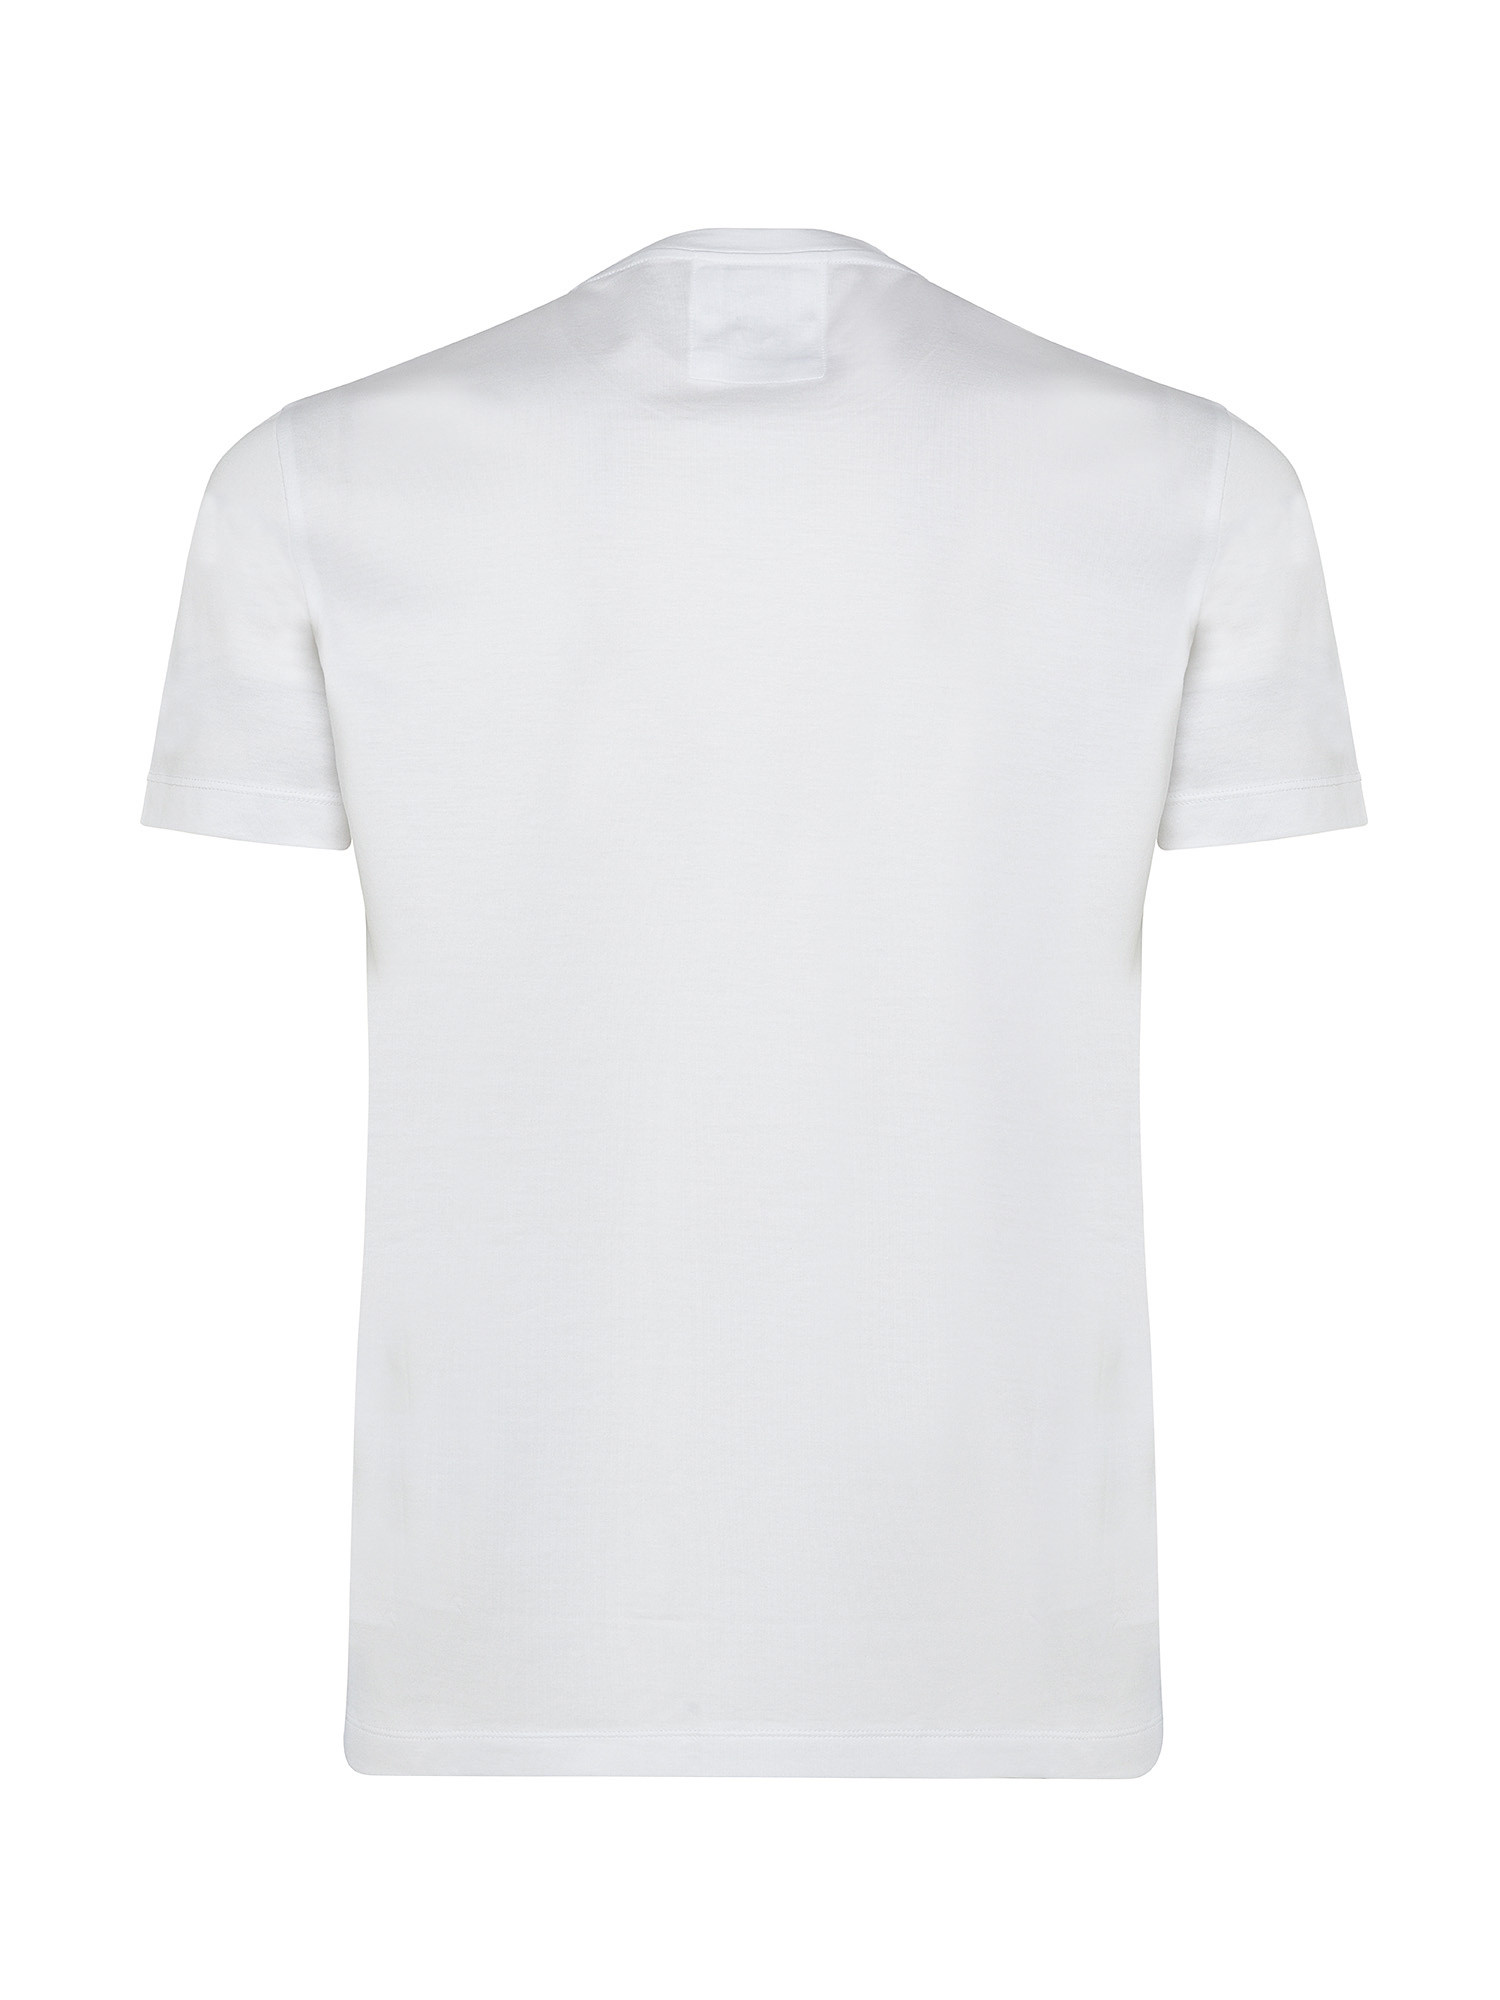 Emporio Armani - T-shirt with lettering logo, White, large image number 1